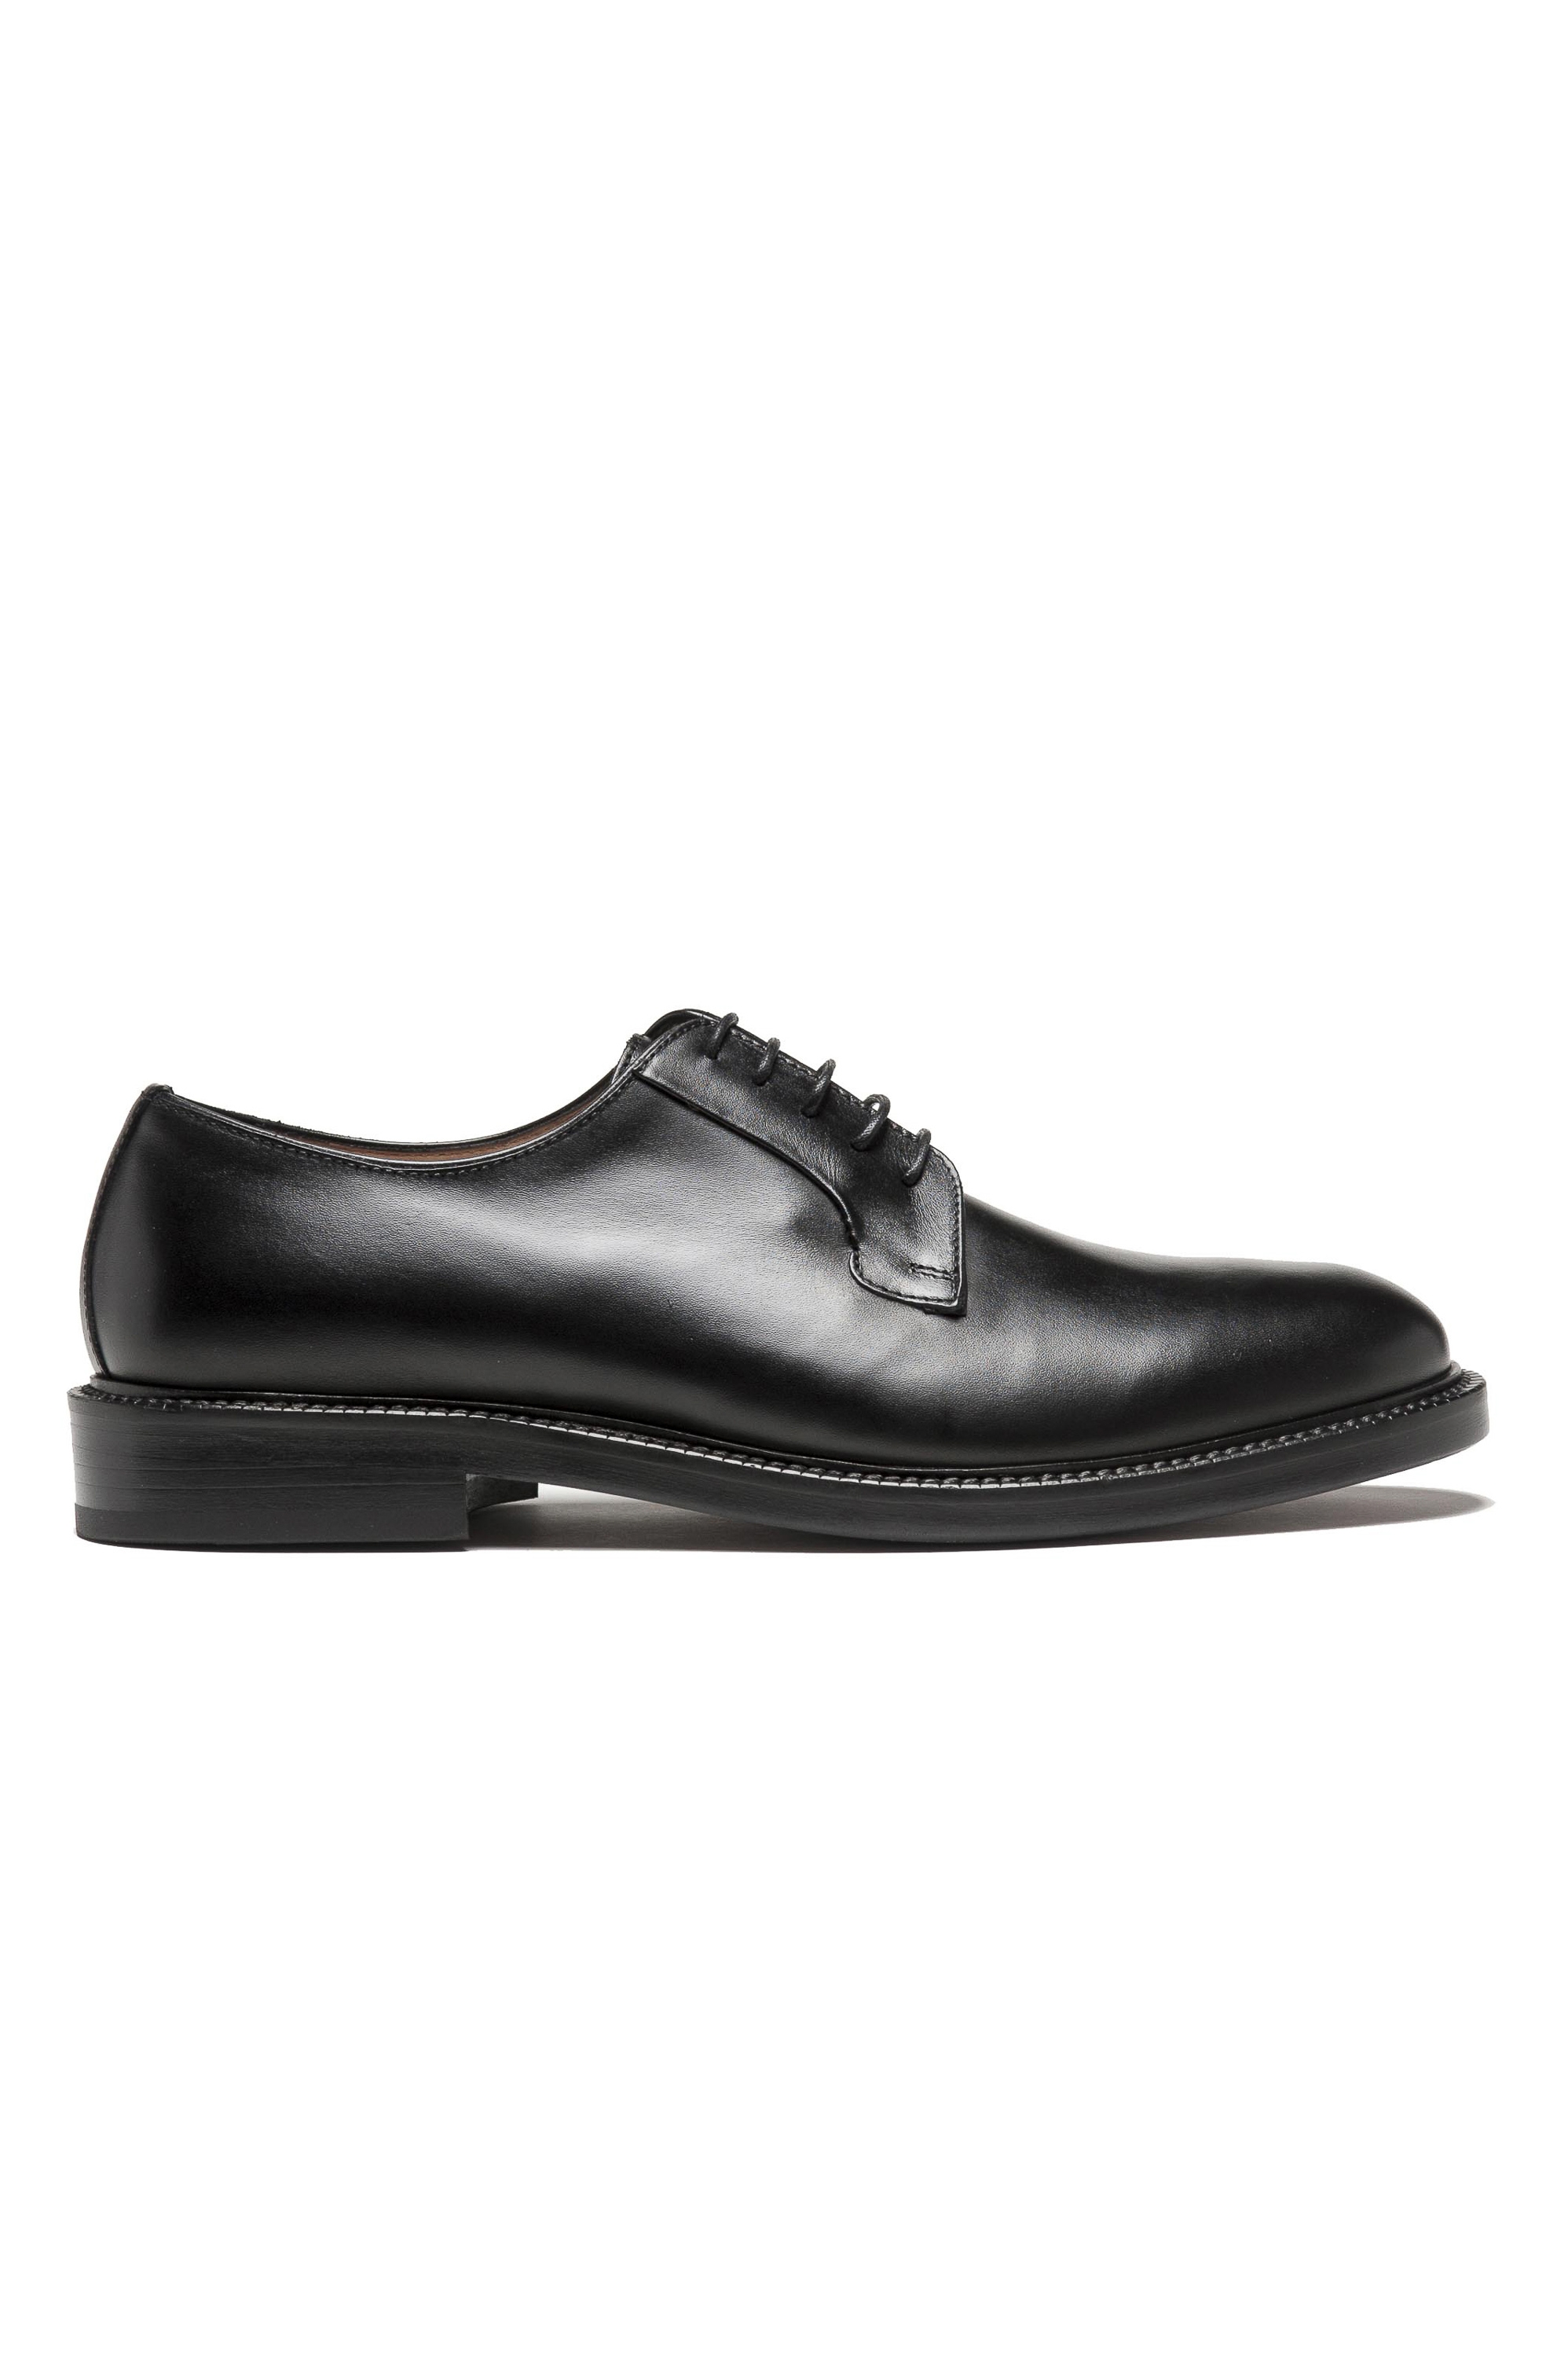 SBU 03200_2021SS Black lace-up plain calfskin derbies with leather sole 01